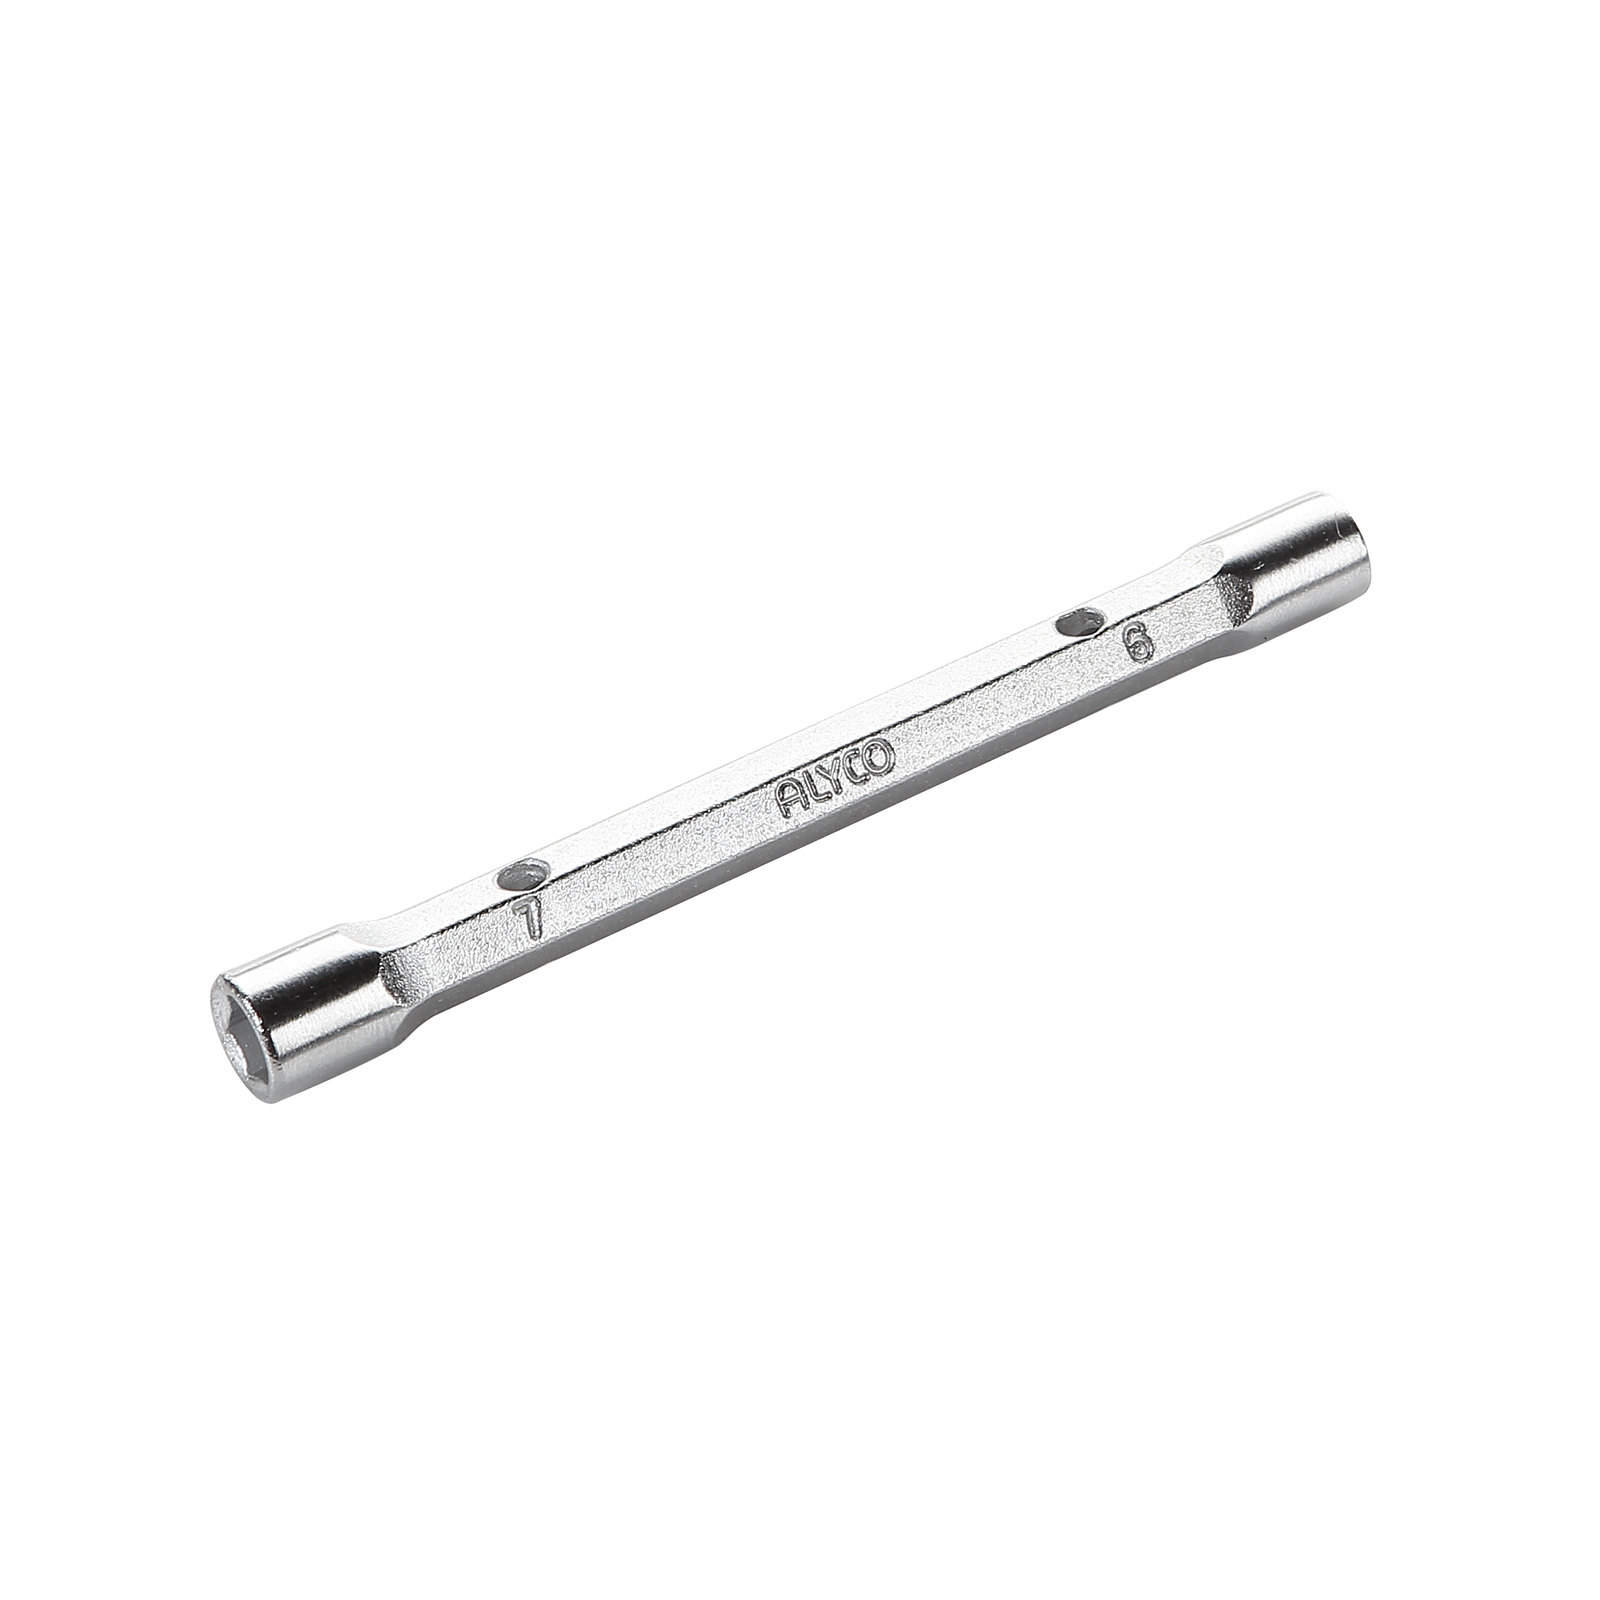 Hexagonal Box Spanner ALYCO | Products | Alyco Tools